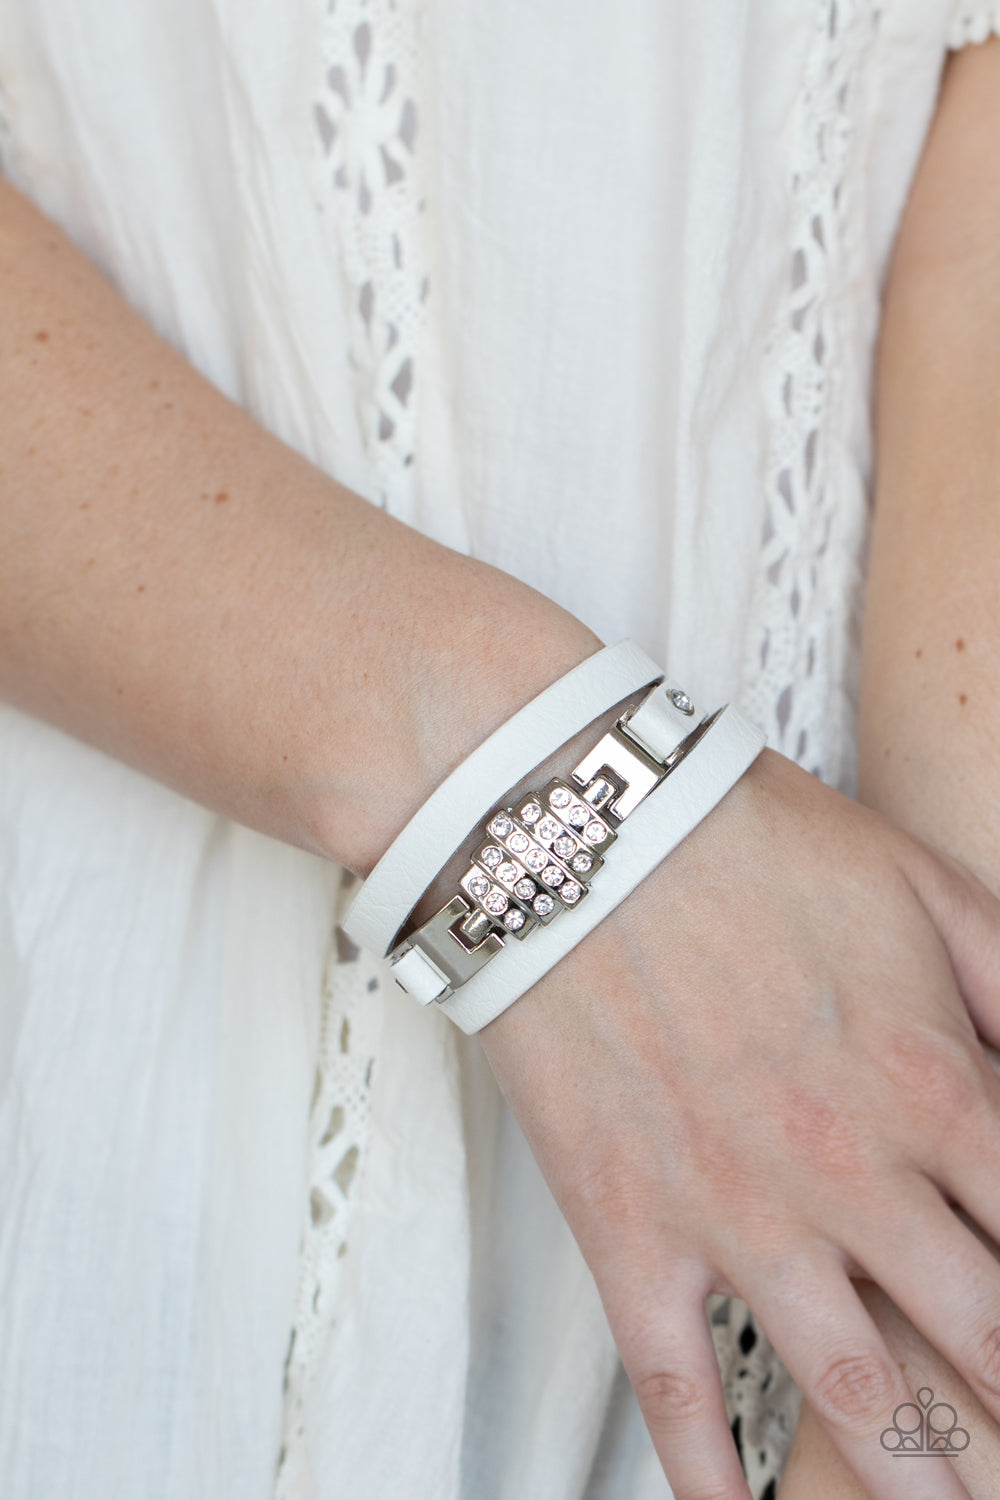 Ultra Urban White Bracelet - Paparazzi Accessories  A white rhinestone silver centerpiece is studded in place by white rhinestone encrusted silver studs across the spliced center of a white leather band, creating a glittery urban look around the wrist. Features an adjustable snap closure.  Sold as one individual bracelet.